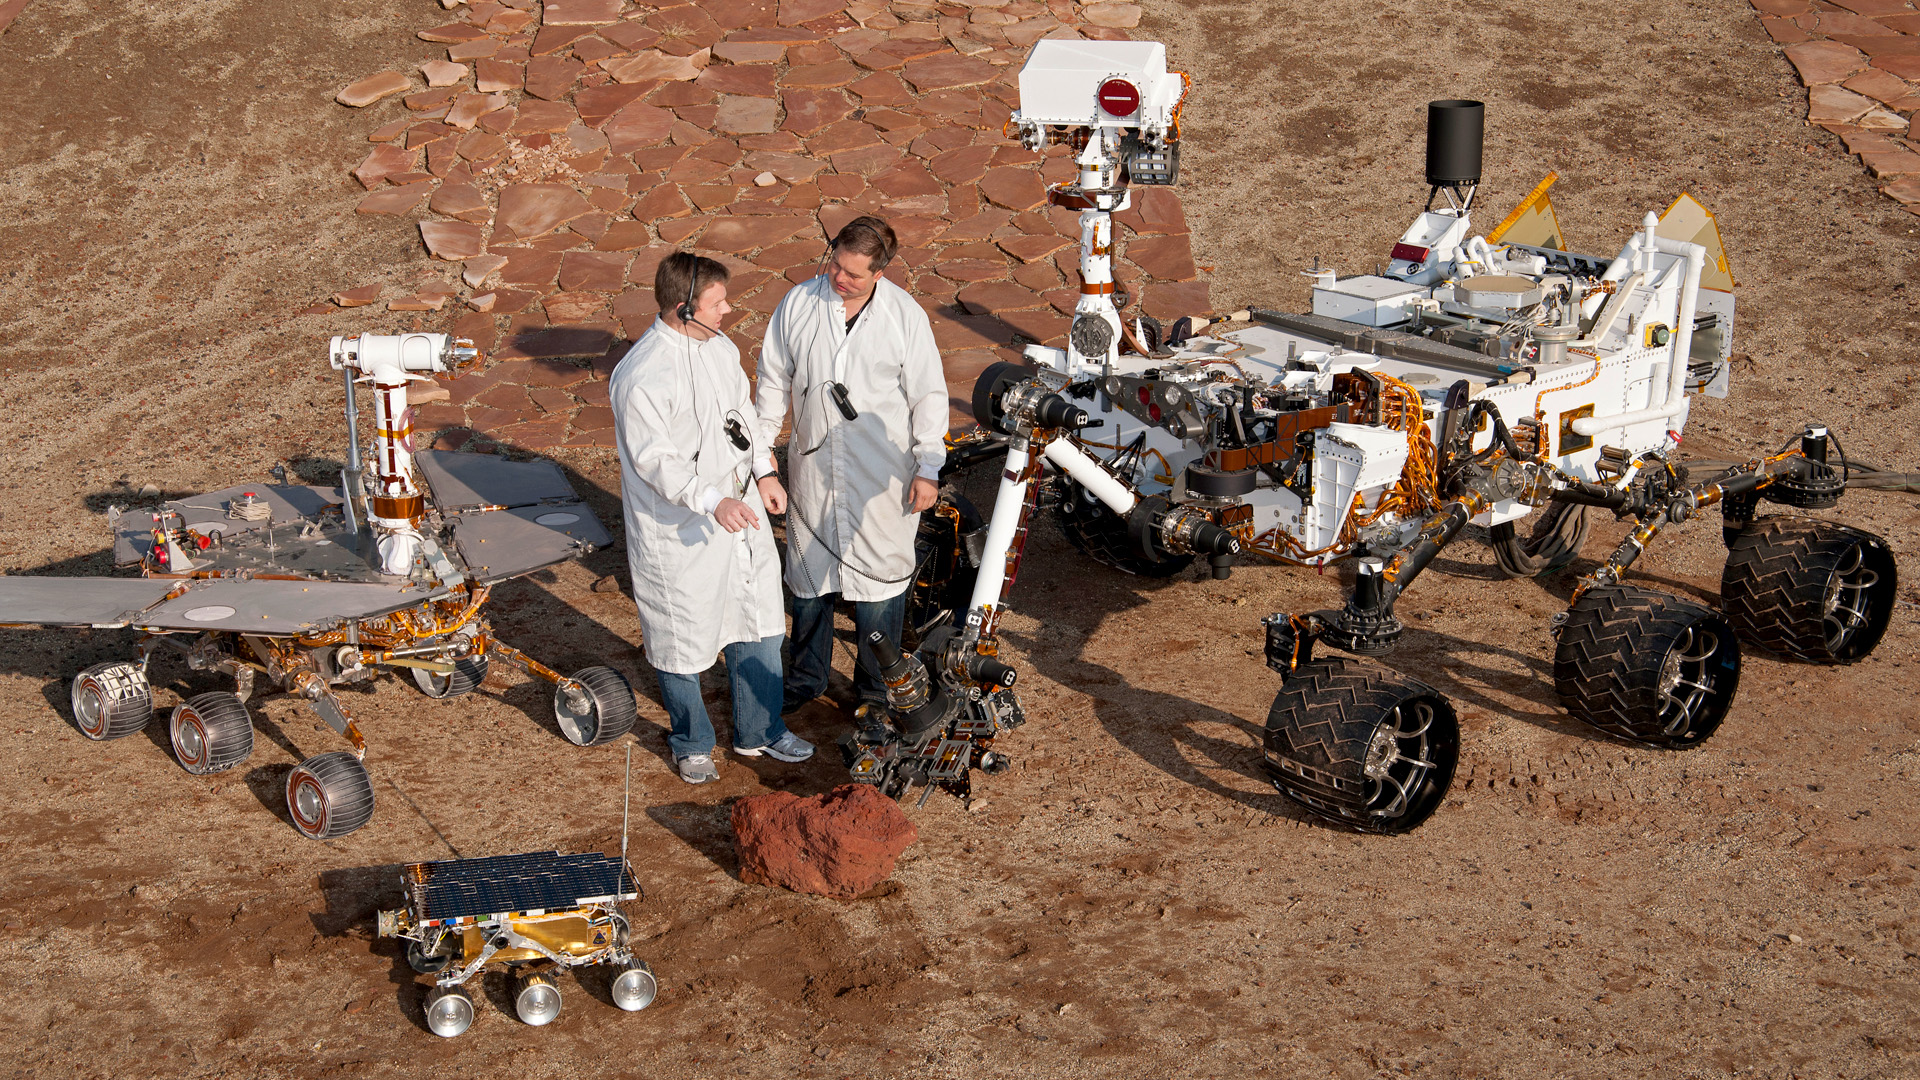 Size comparison between Curiosity rover and previous mars rovers